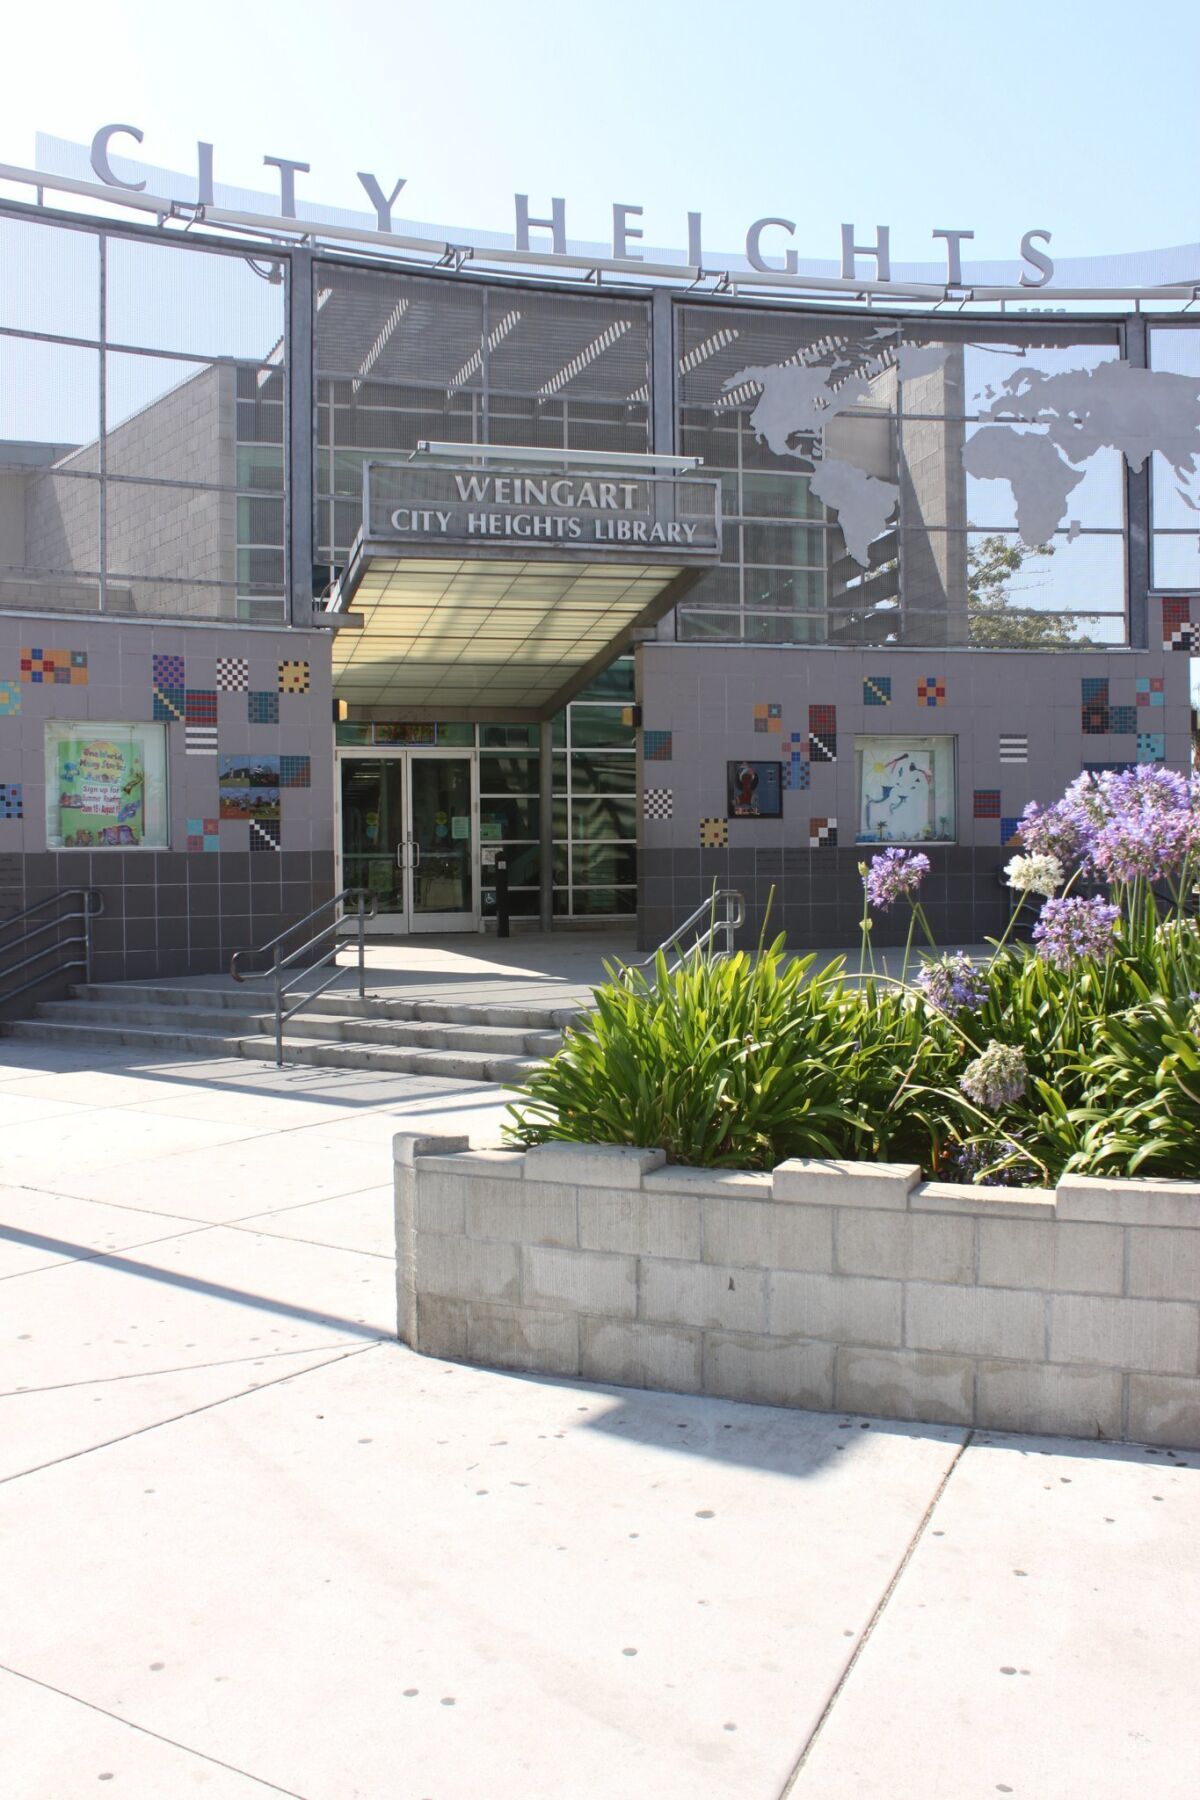 The San Diego Library's City Heights/Weingart Branch is benefitting from a new social equity policy.